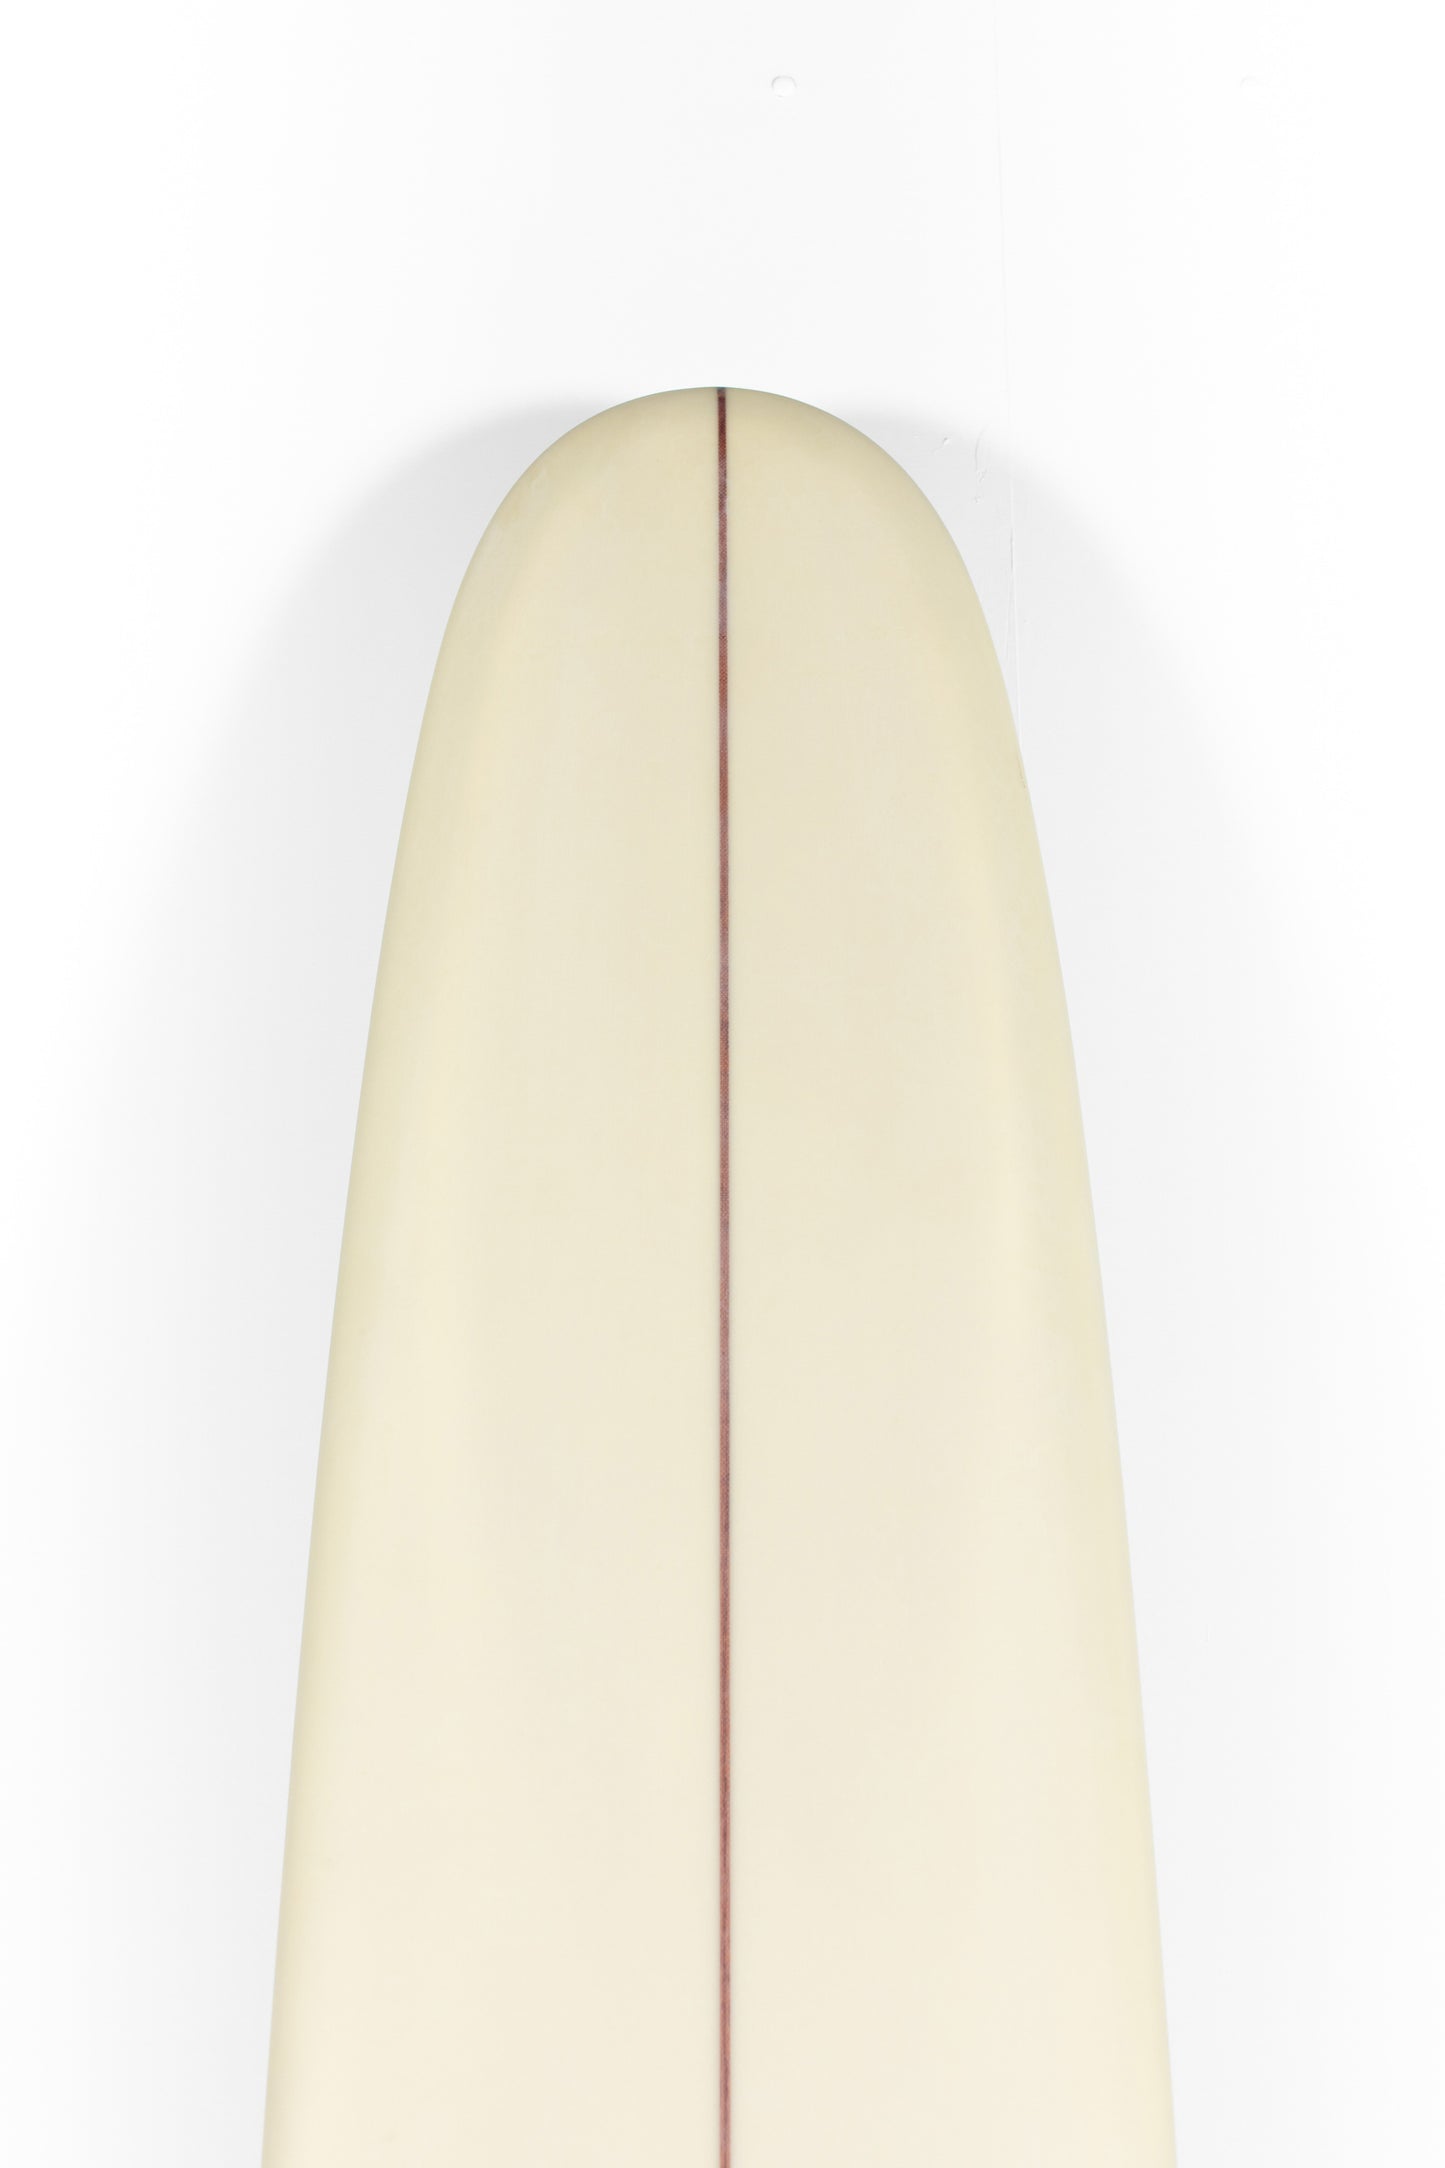 Thomas Surfboards - SCOOP TAIL NOSERIDER - 9'4